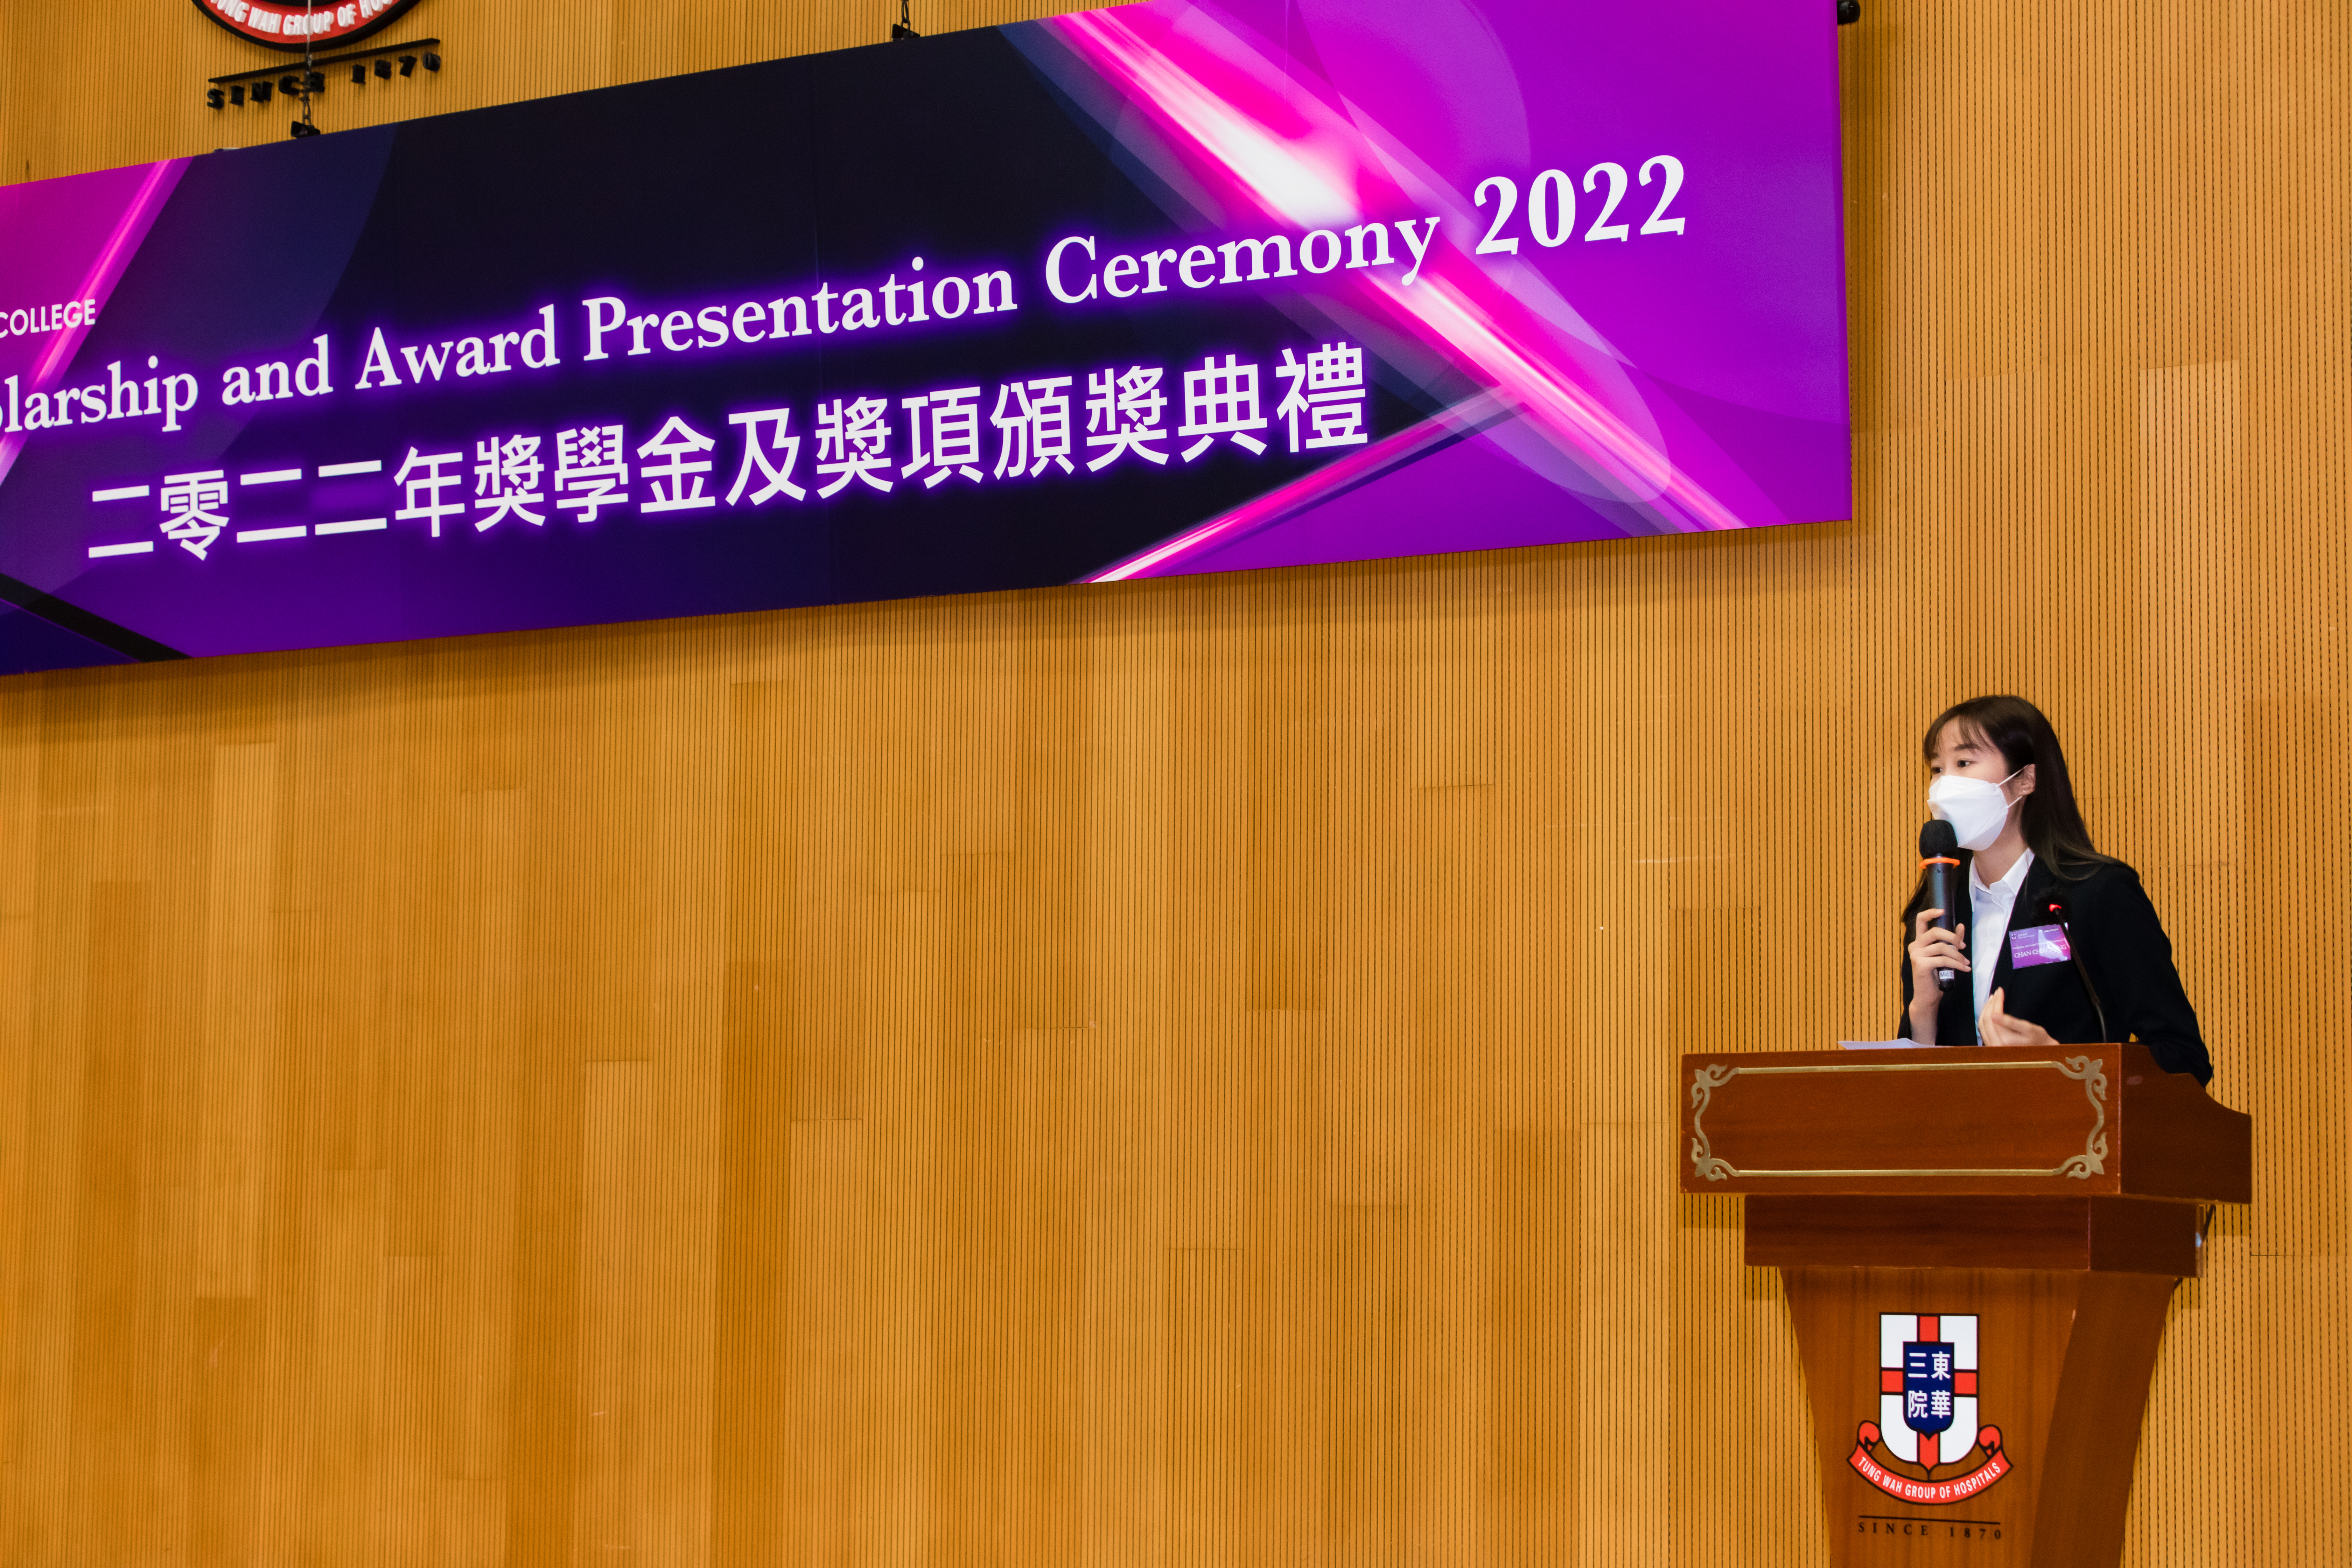 Ms. Chan Chiu-yung, student representative and Year 2 student of the Bachelor of Science (Hons) in Physiotherapy programme, expressed heartfelt thanks to the teachers for their dedication to nurturing students.